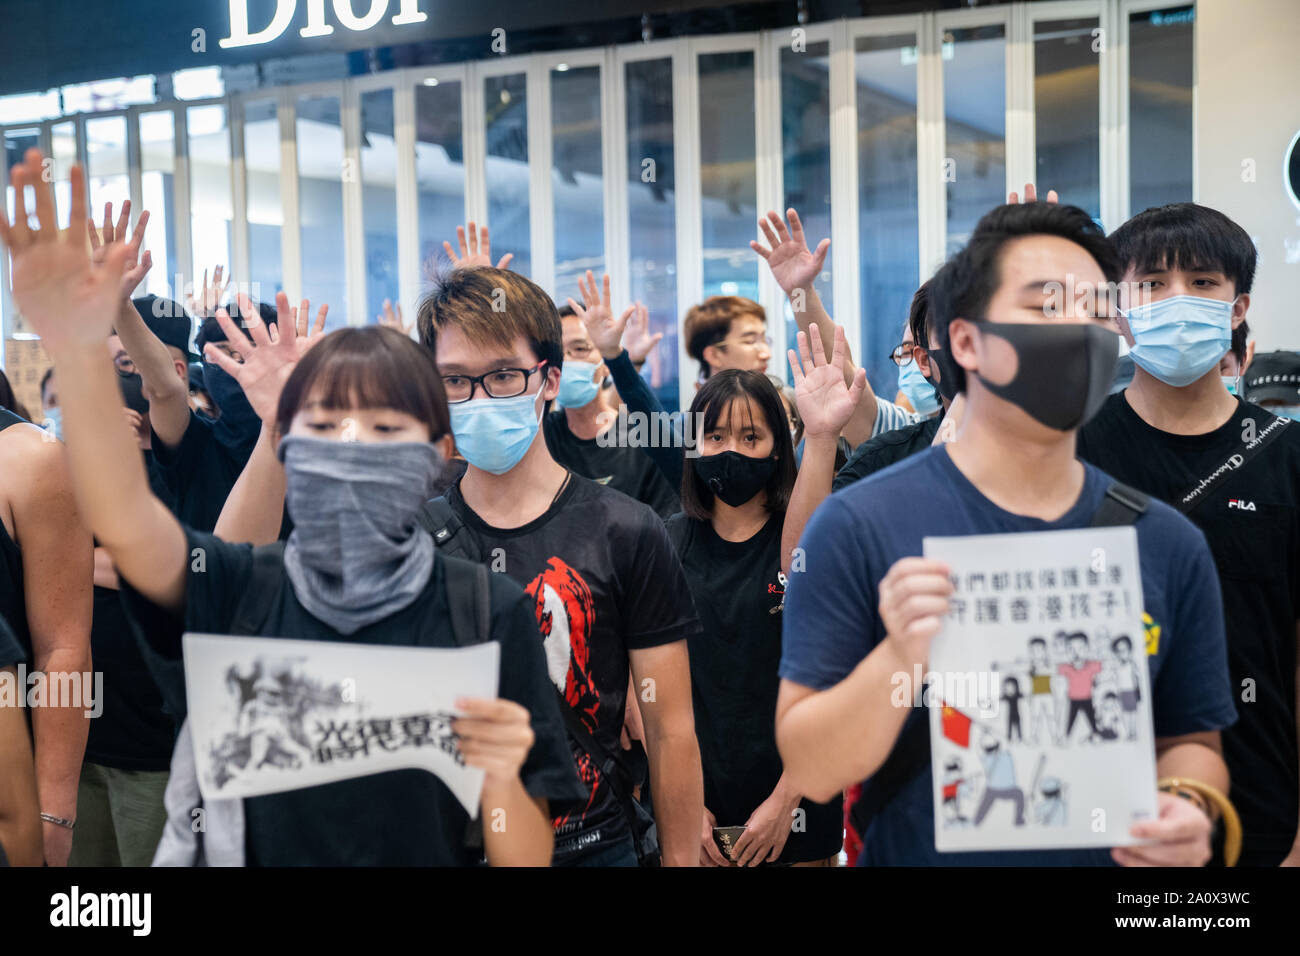 Pro-democracy protesters sing songs and shout slogans as they gather in a shopping mall during a rally in Yeun Long.Pro-democracy protesters have continued demonstrations across Hong Kong, calling for the city's Chief Executive Carrie Lam to immediately meet the rest of their demands, including an independent inquiry into police brutality, the retraction of the word “riot” to describe the rallies, and genuine universal suffrage, as the territory faces a leadership crisis. Stock Photo